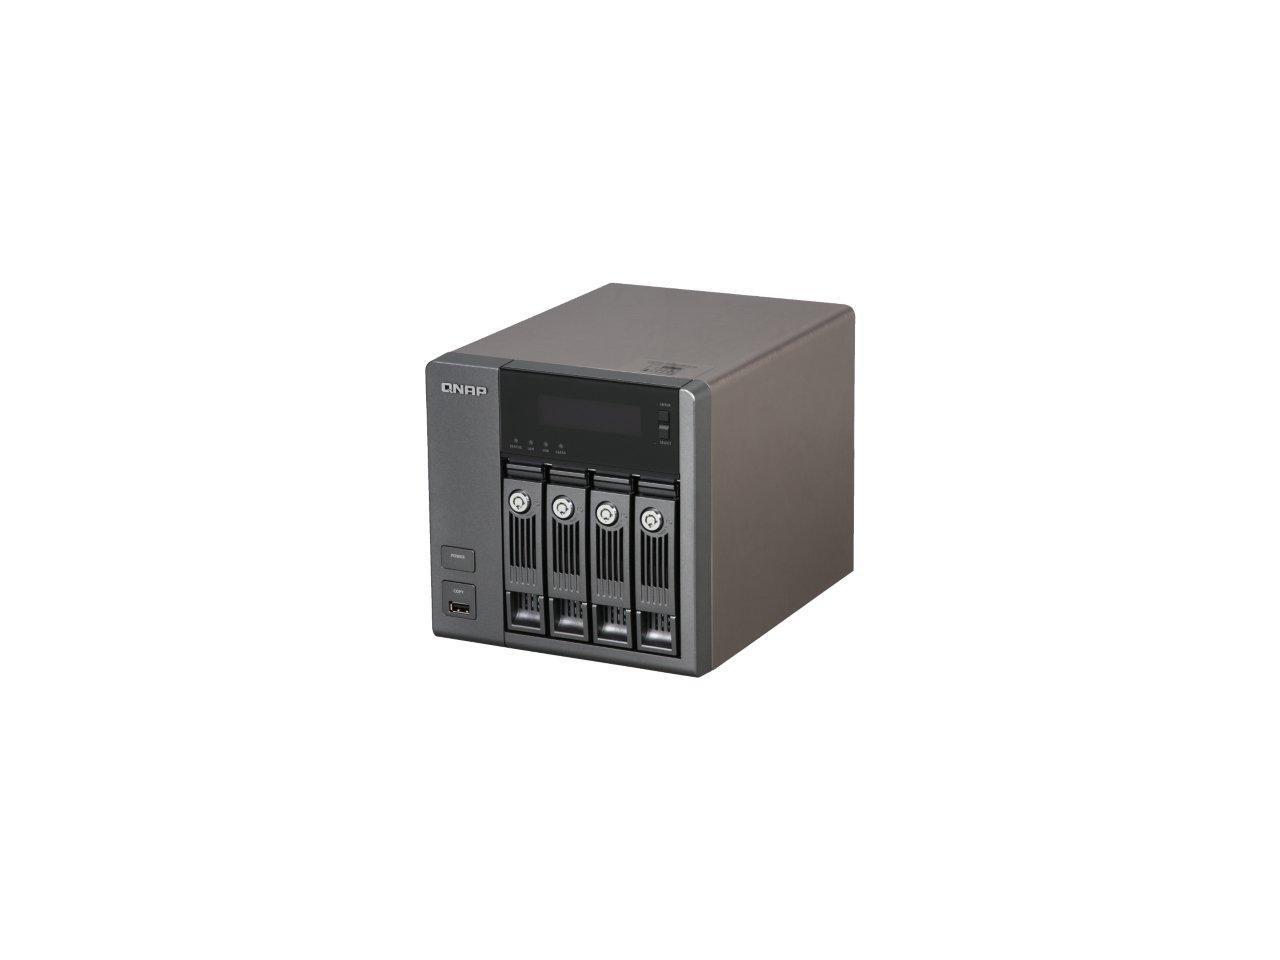 QNAP TS-419P-US Turbo NAS Server with iSCSI for SMB and SOHO Users 